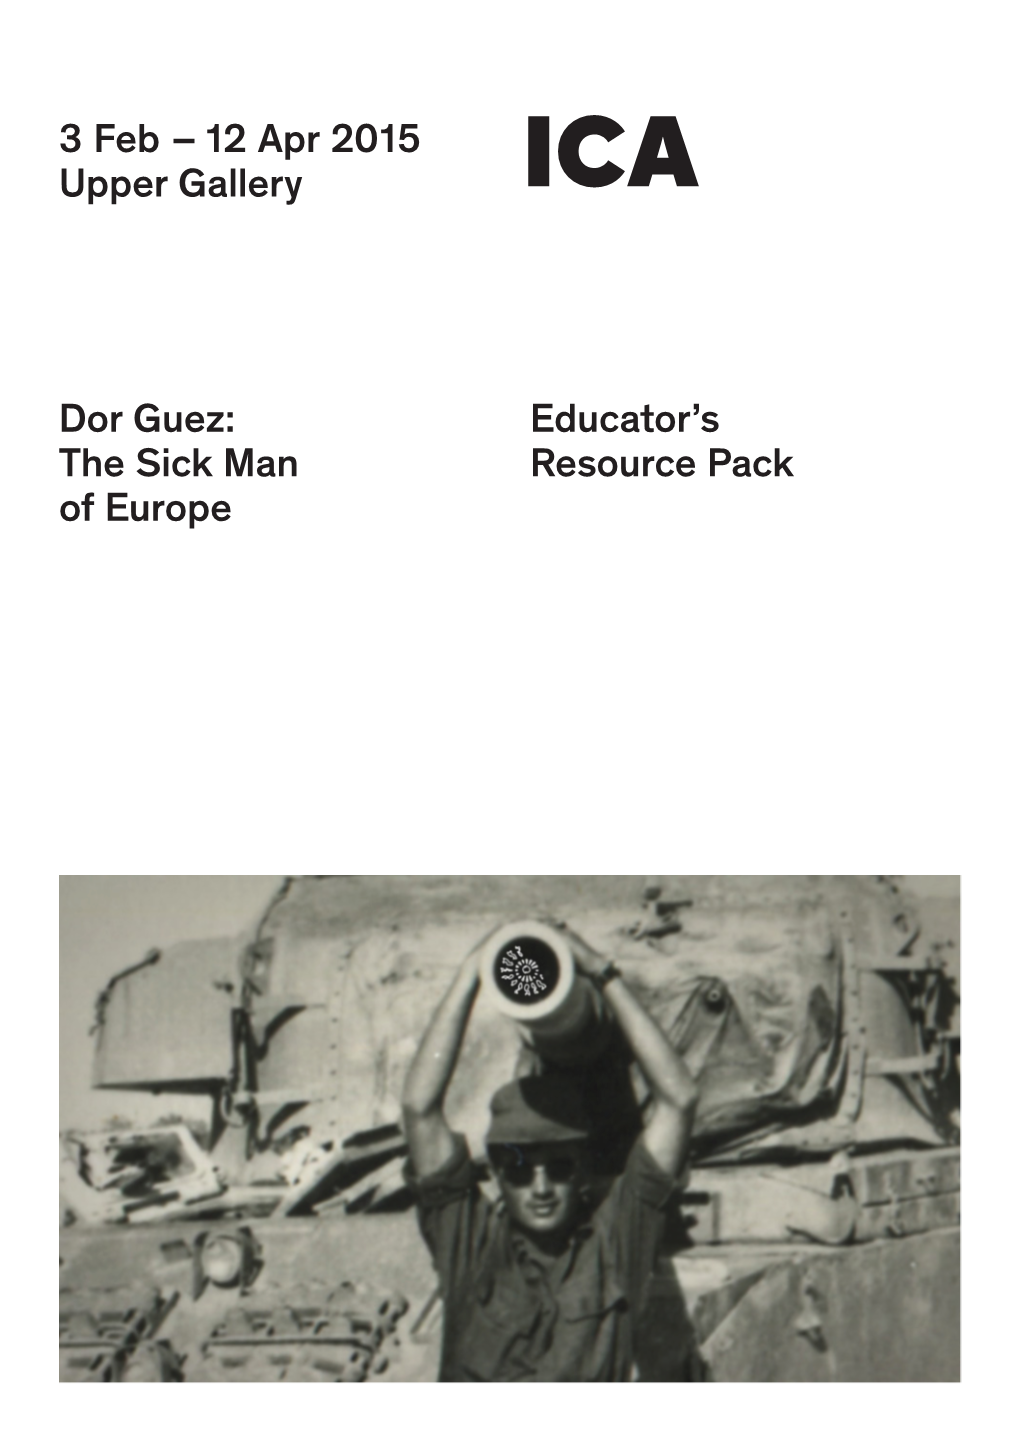 Educator's Resource Pack 3 Feb – 12 Apr 2015 Upper Gallery Dor Guez: the Sick Man of Europe